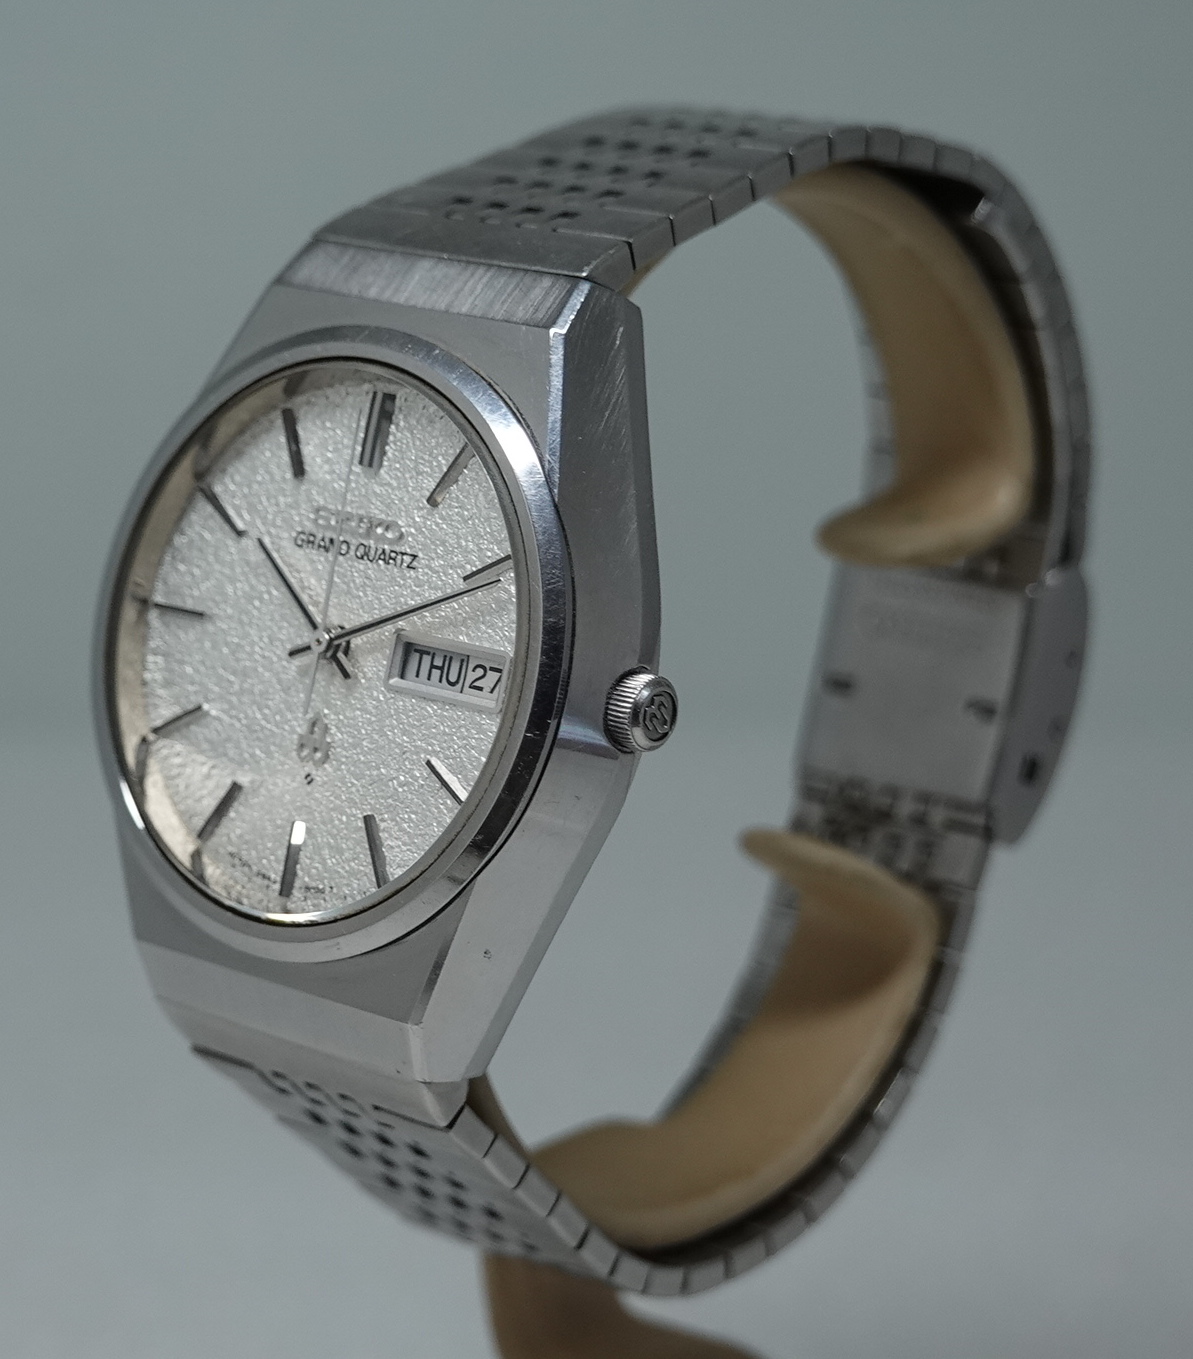 SOLD 1976 Seiko Grand Quartz Snowflake with box and instructions